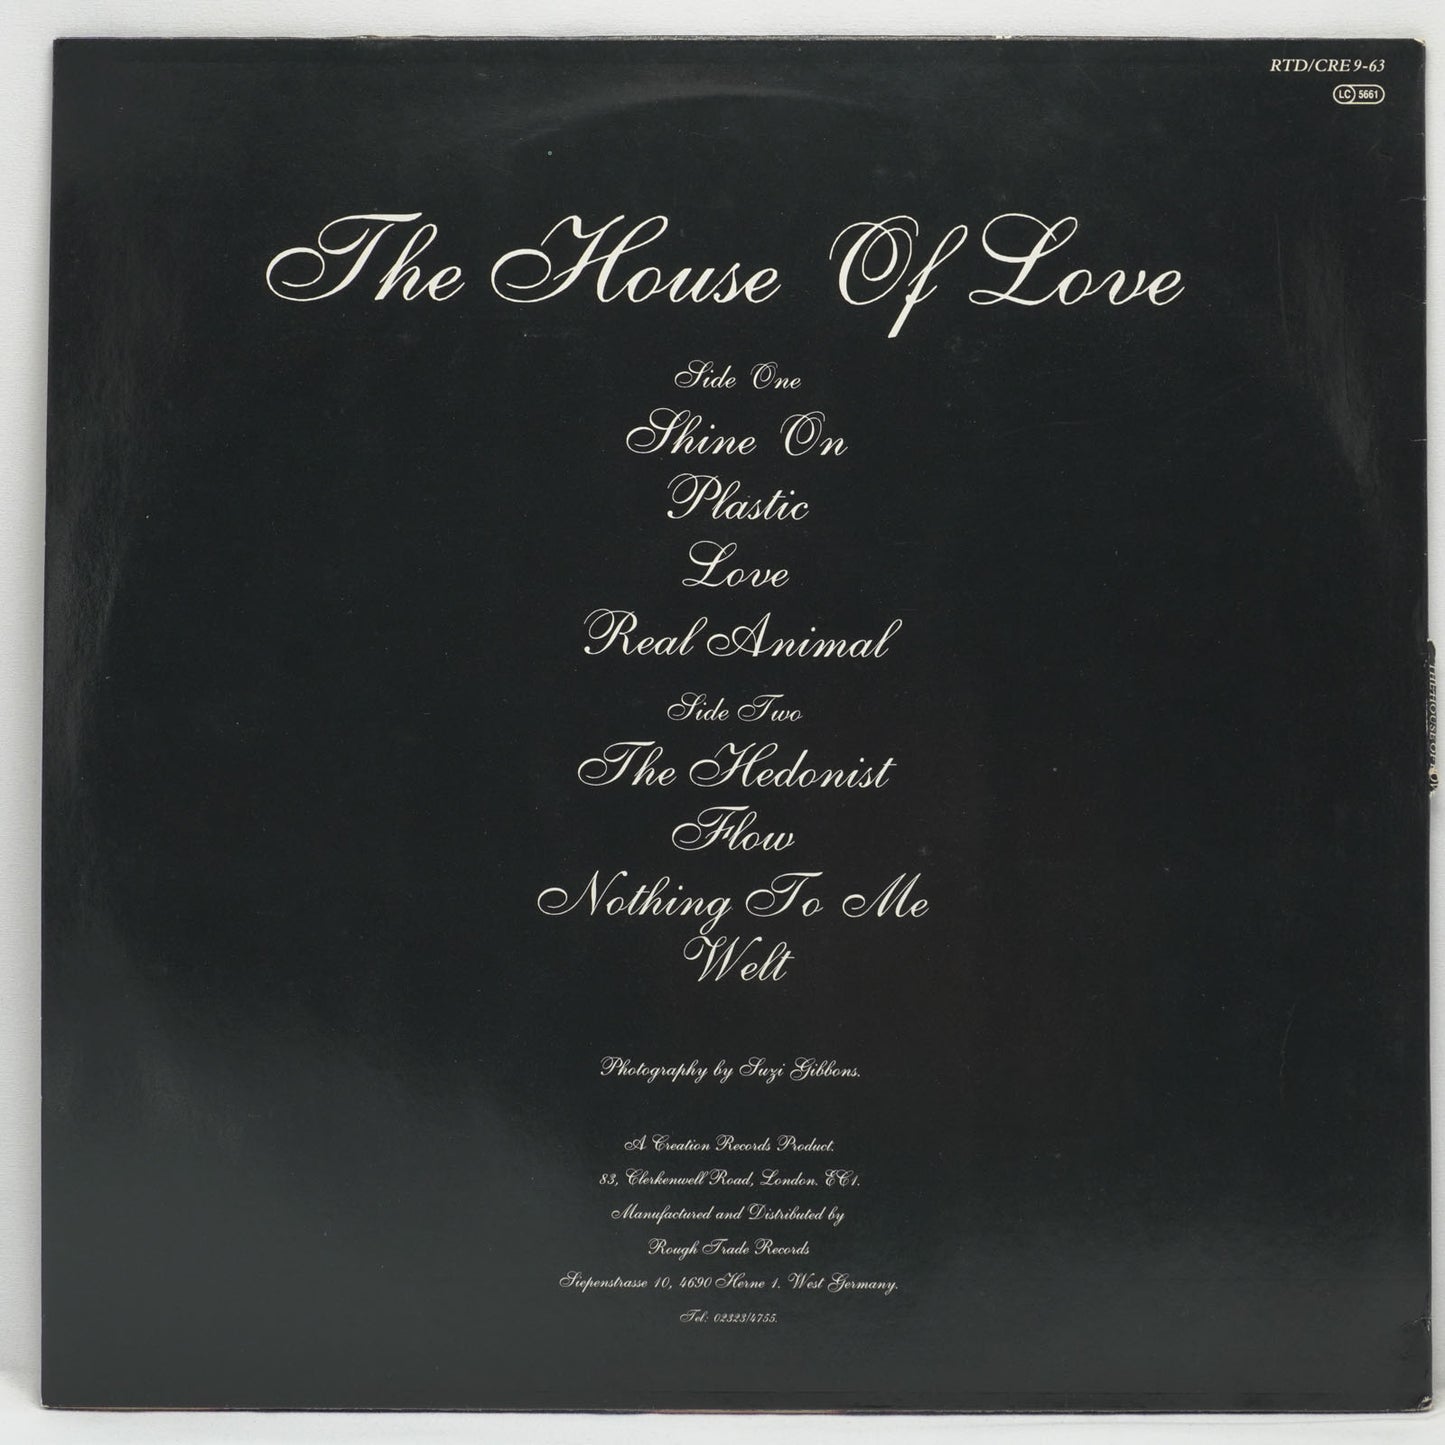 The House Of Love – The House Of Love